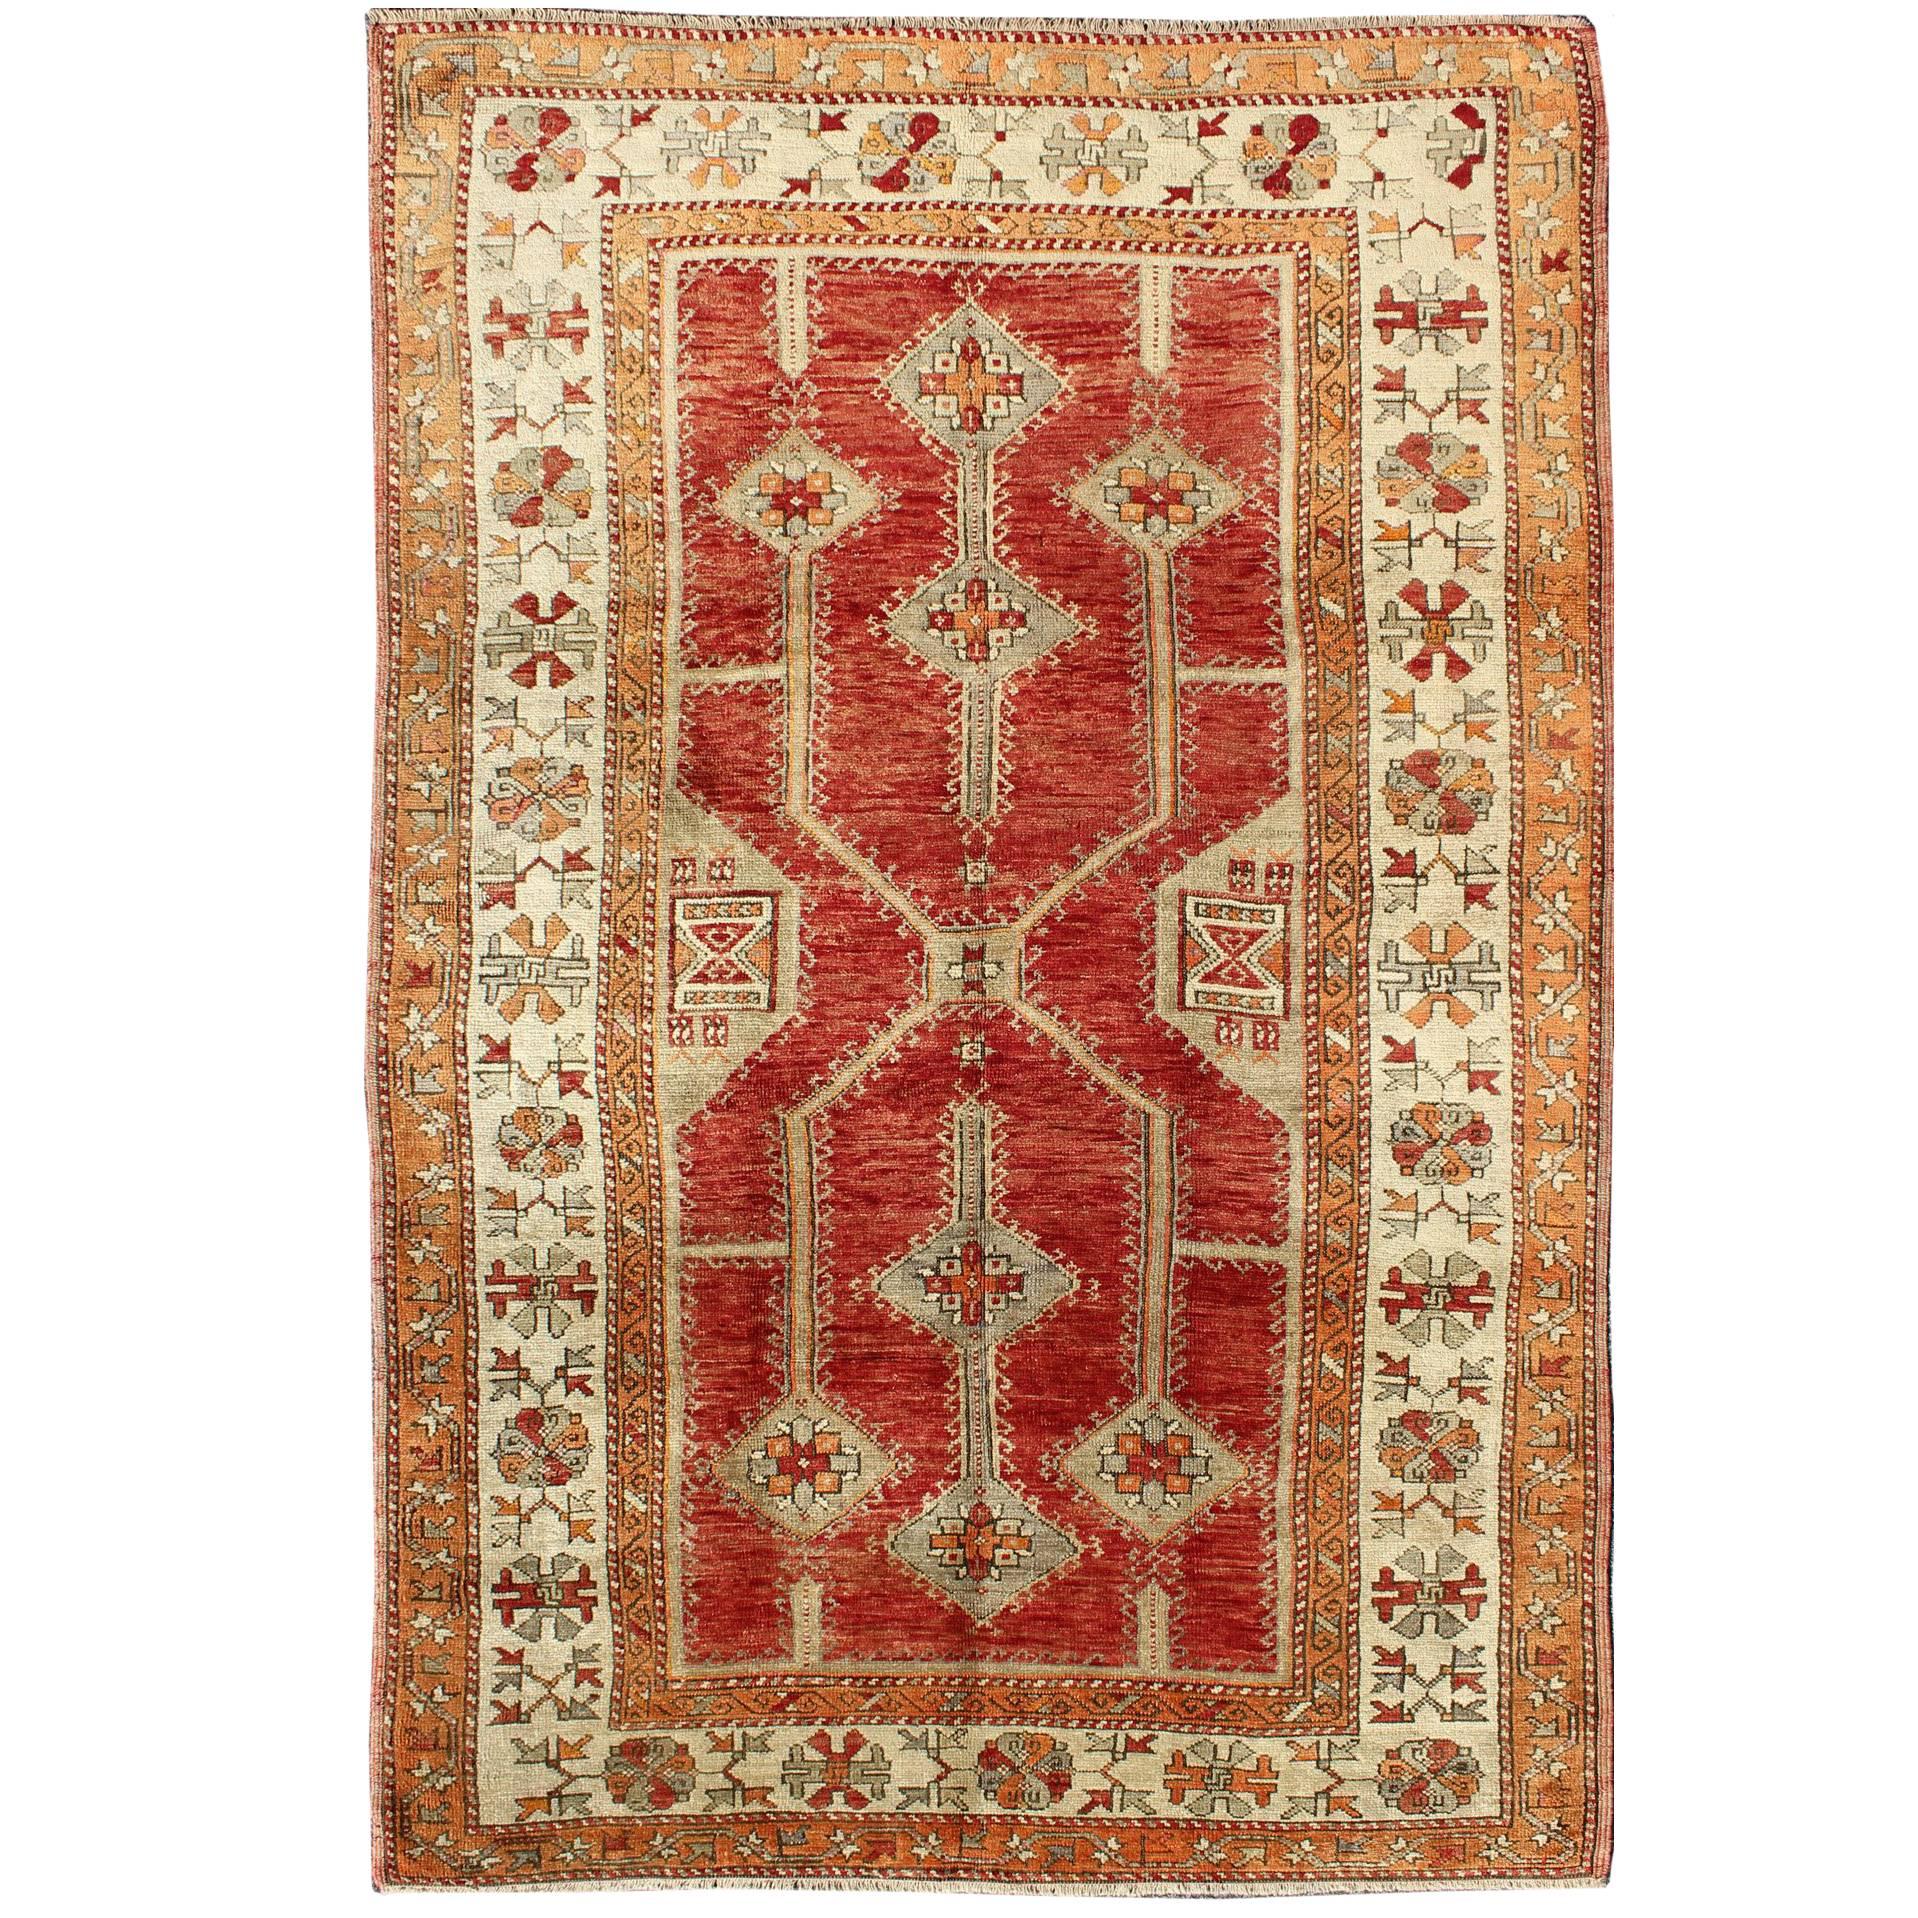 Antique Turkish Oushak Rug With Geometric Design in Red, Light Green & L. Orange For Sale